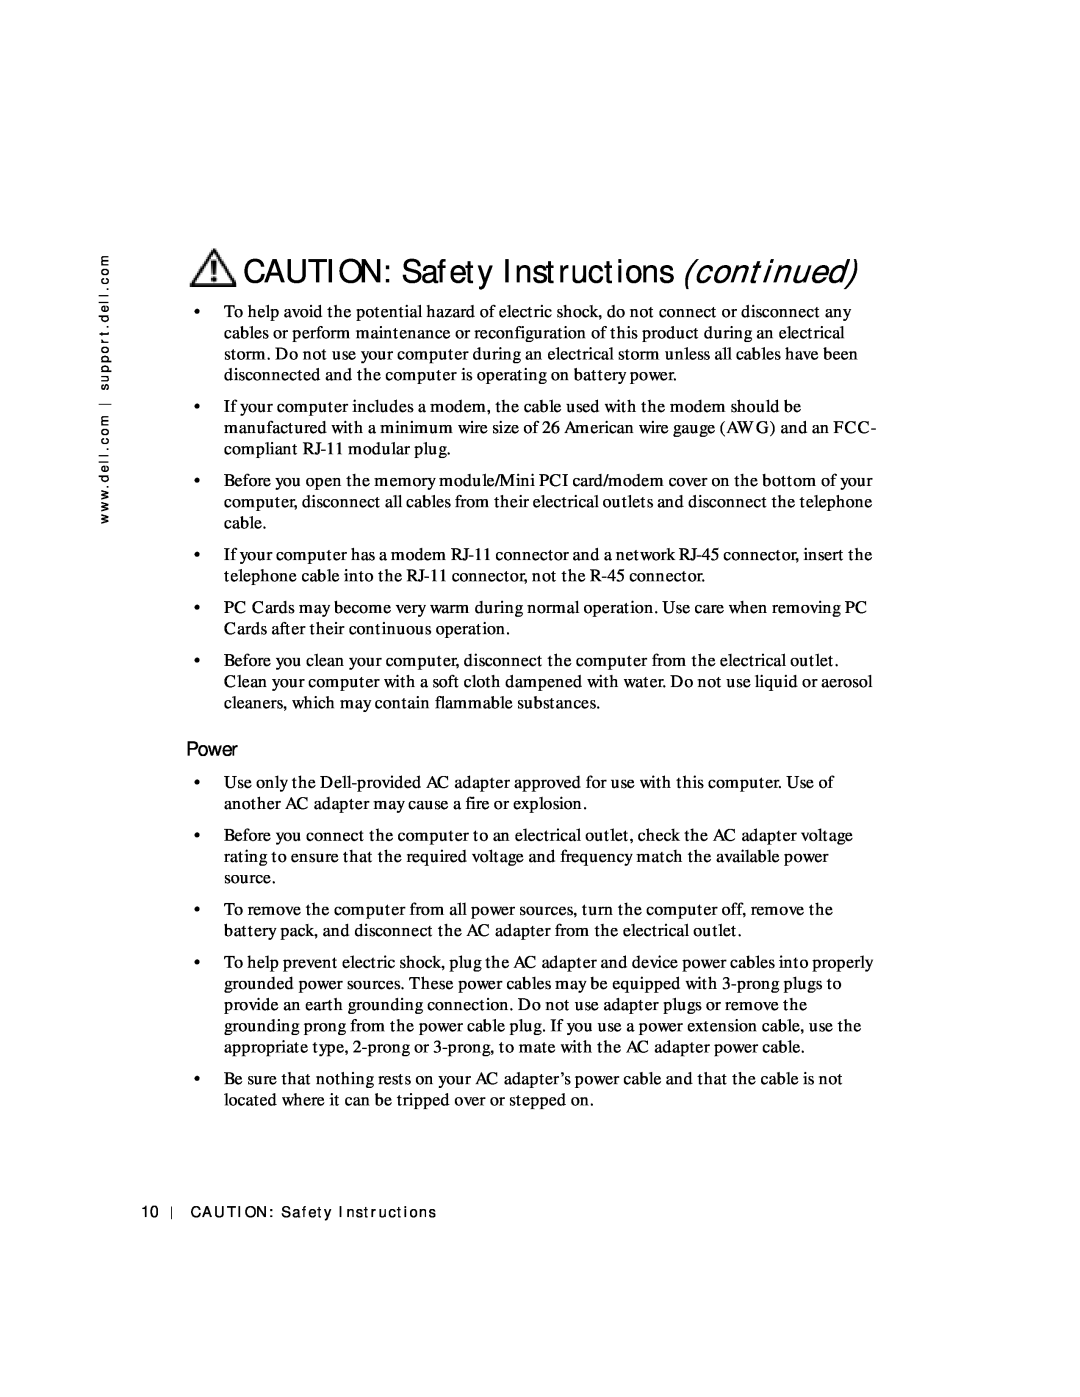 Dell 4150 owner manual CAUTION Safety Instructions continued, Power 